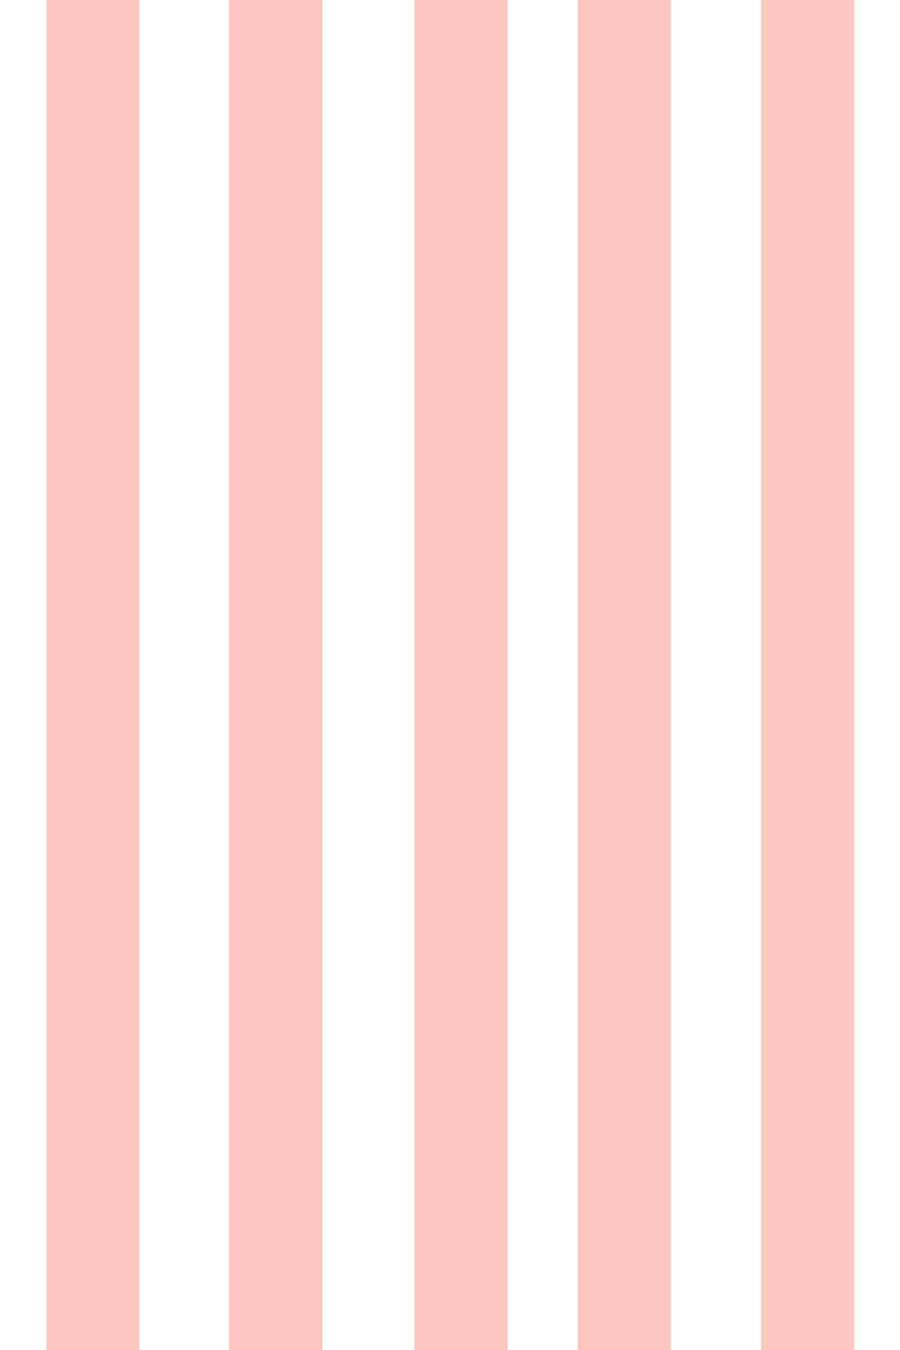 Woolf With Me Fitted Crib Sheet Stripes color_pale-pink